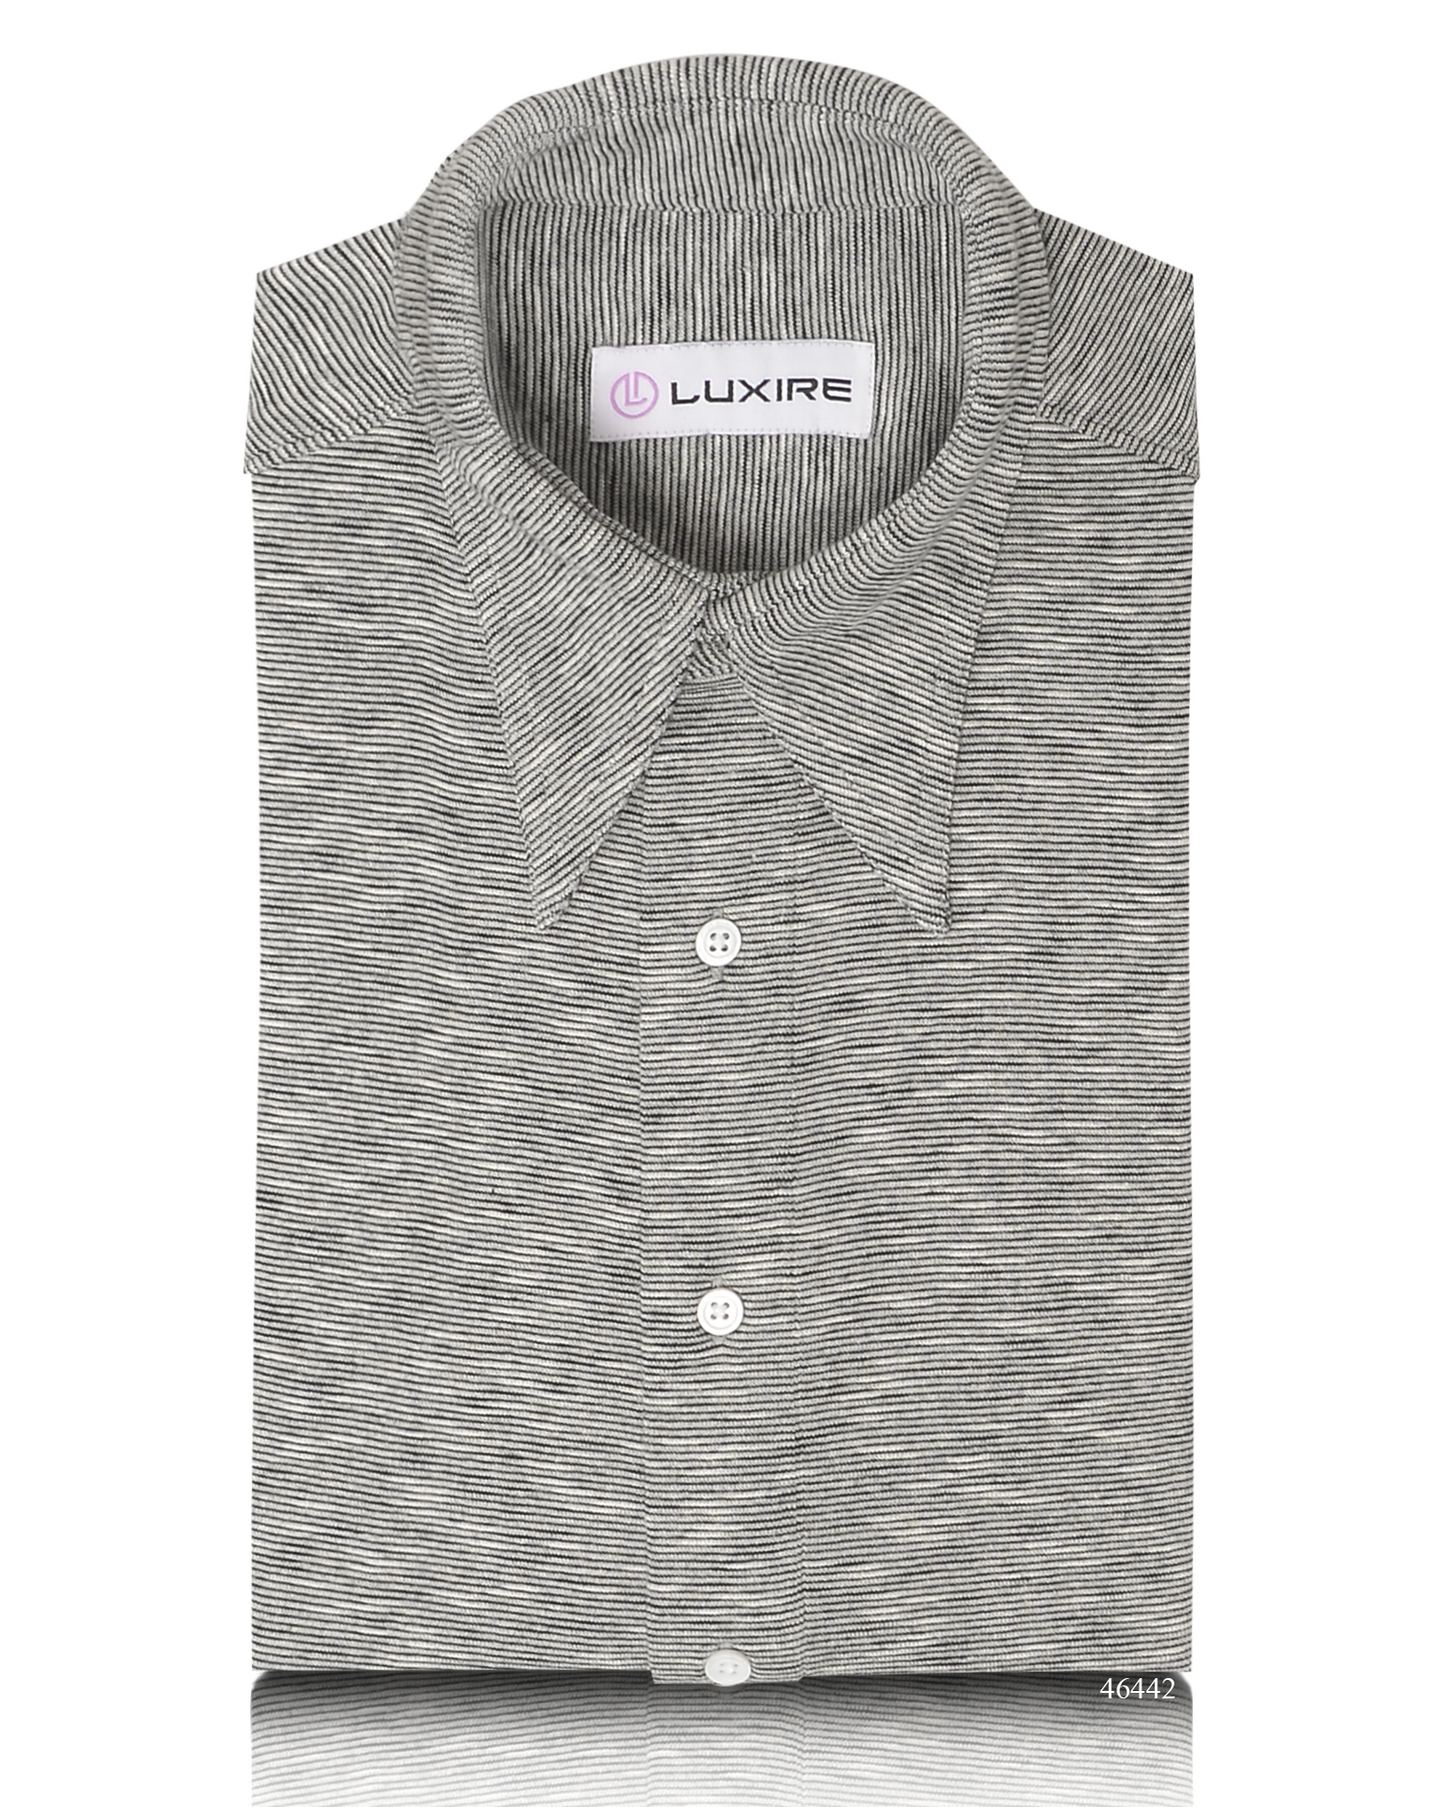 Front of the custom oxford polo shirt for men by Luxire in black and white